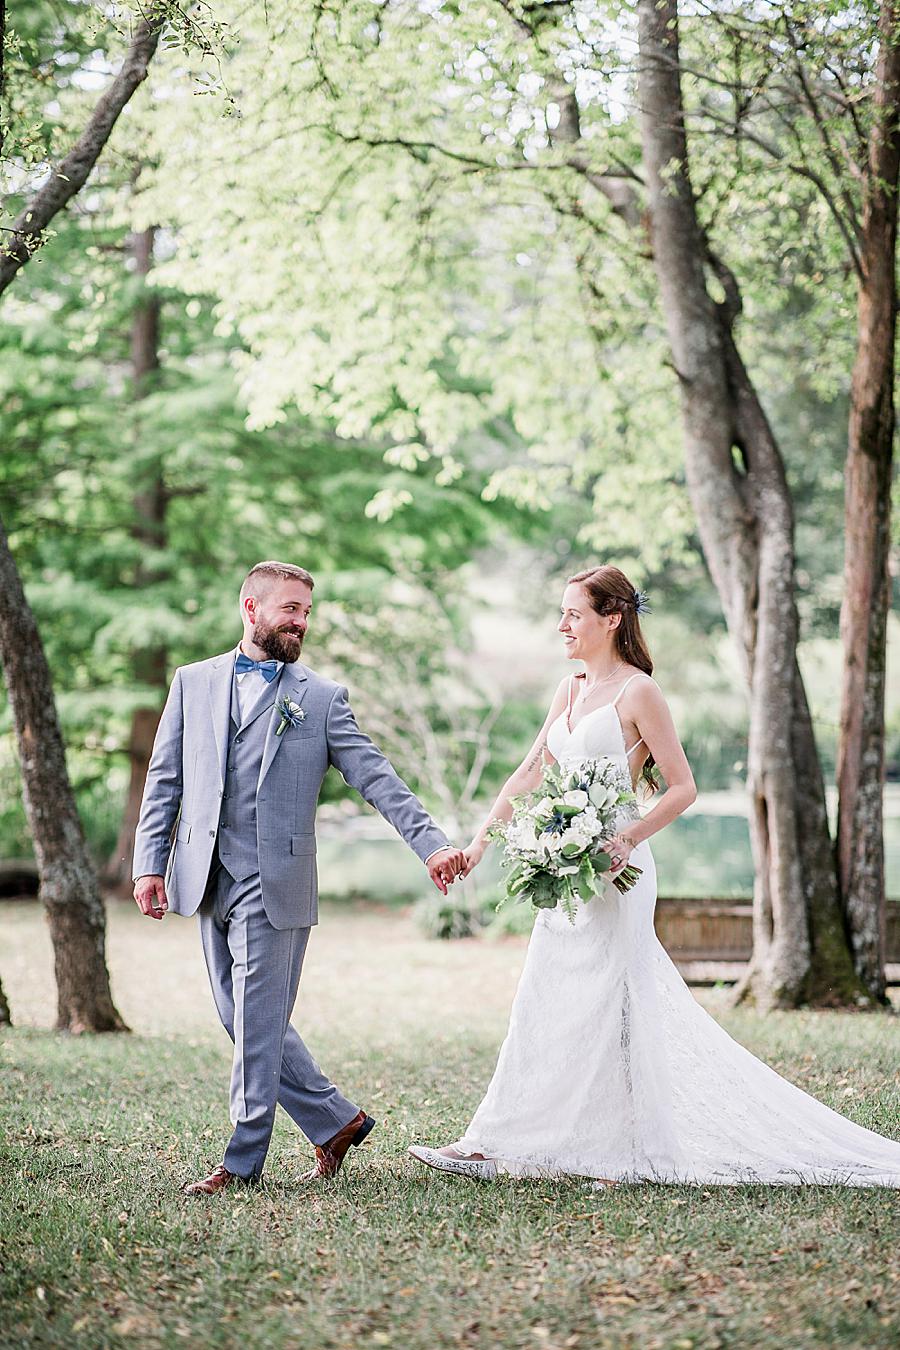 Almost married at this Marblegate Farm Wedding by Knoxville Wedding Photographer, Amanda May Photos.